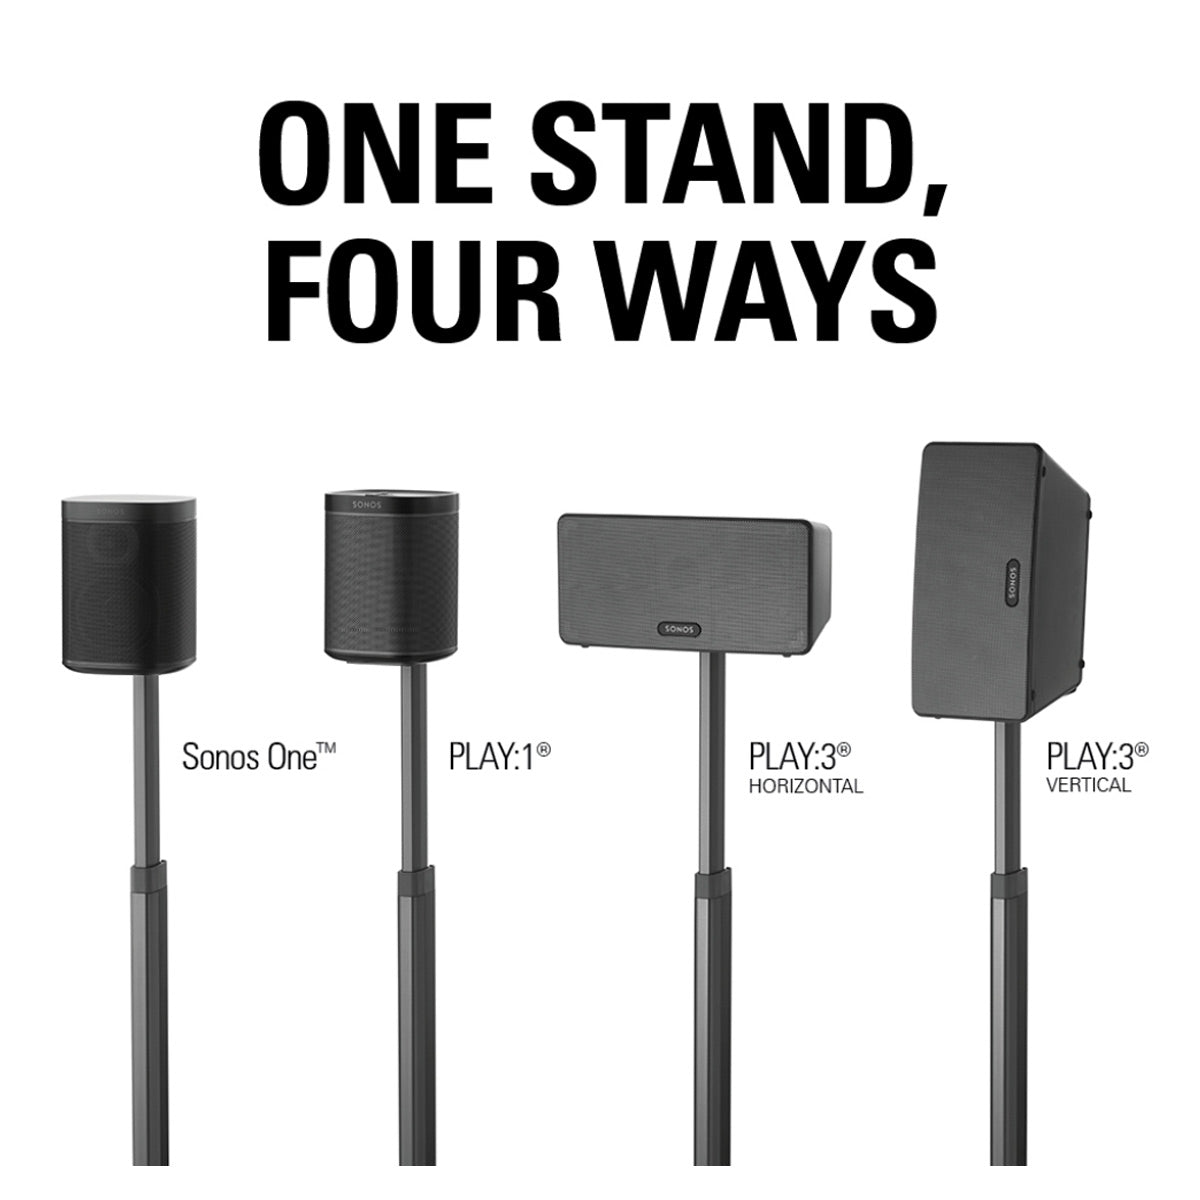 Sanus WSSA2 Height-Adjustable Wireless Speaker Stands for Sonos ONE, PLAY:1, and PLAY:3 - Pair (Black)